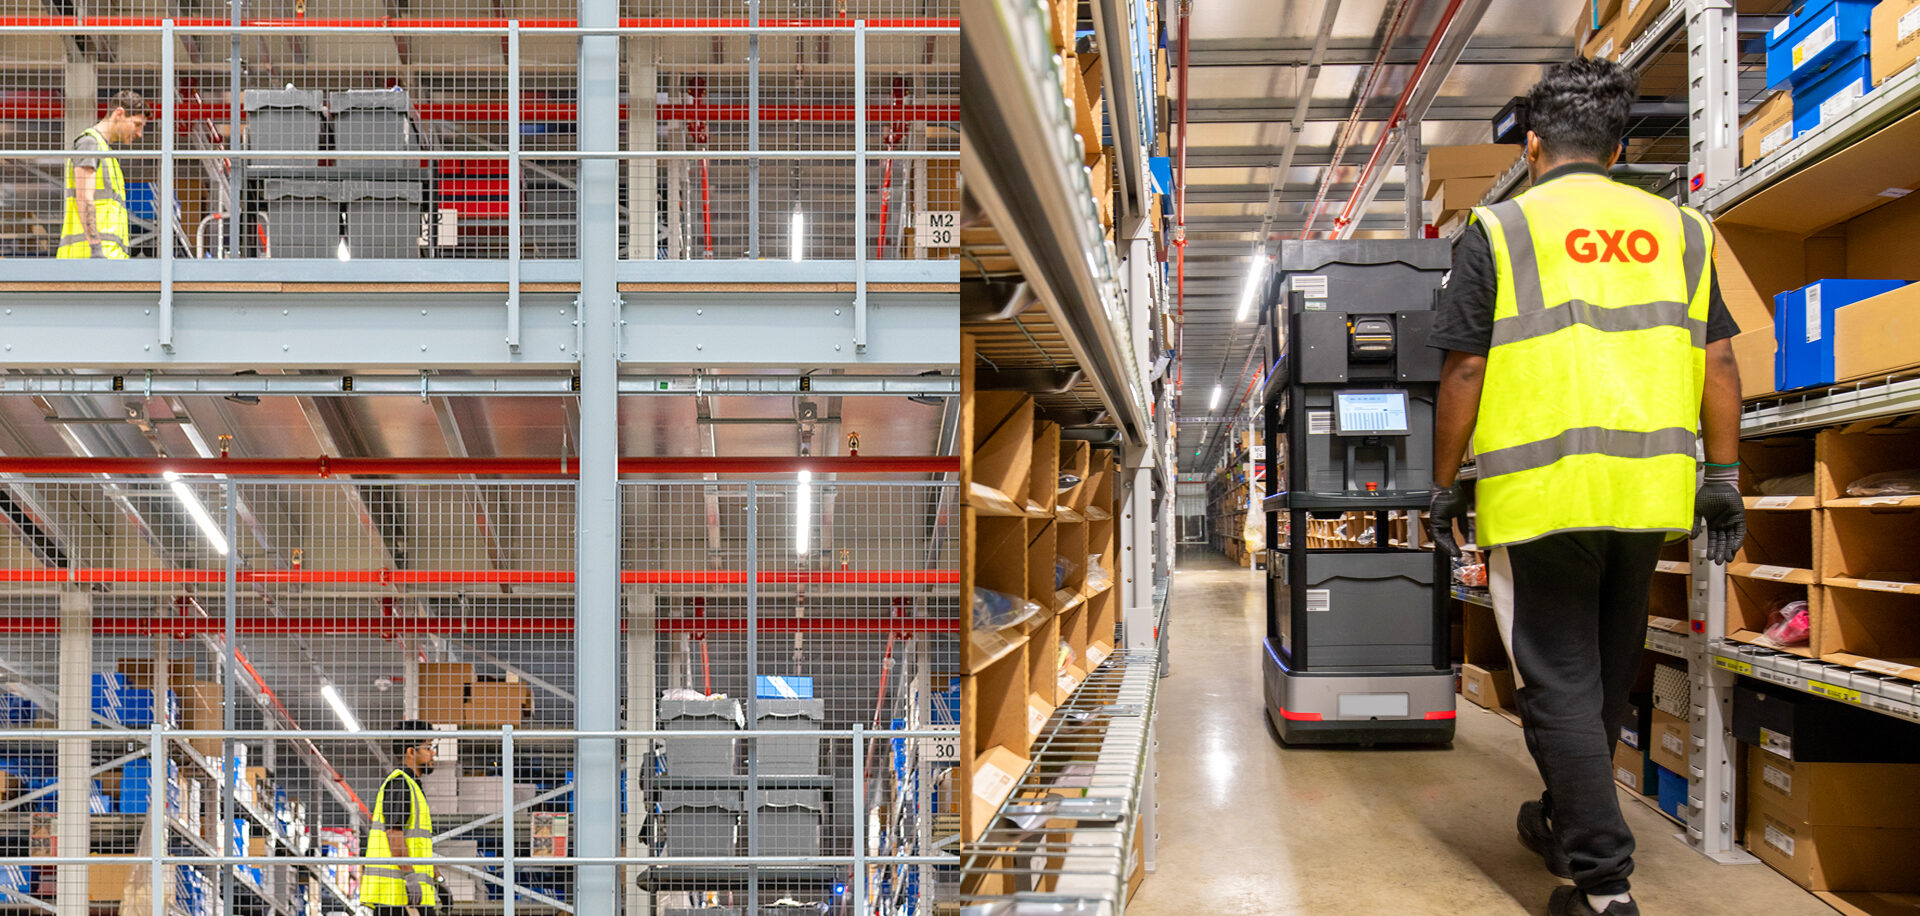 GXO implements multi-tiered in UK distribution center Parcel and Postal Technology International